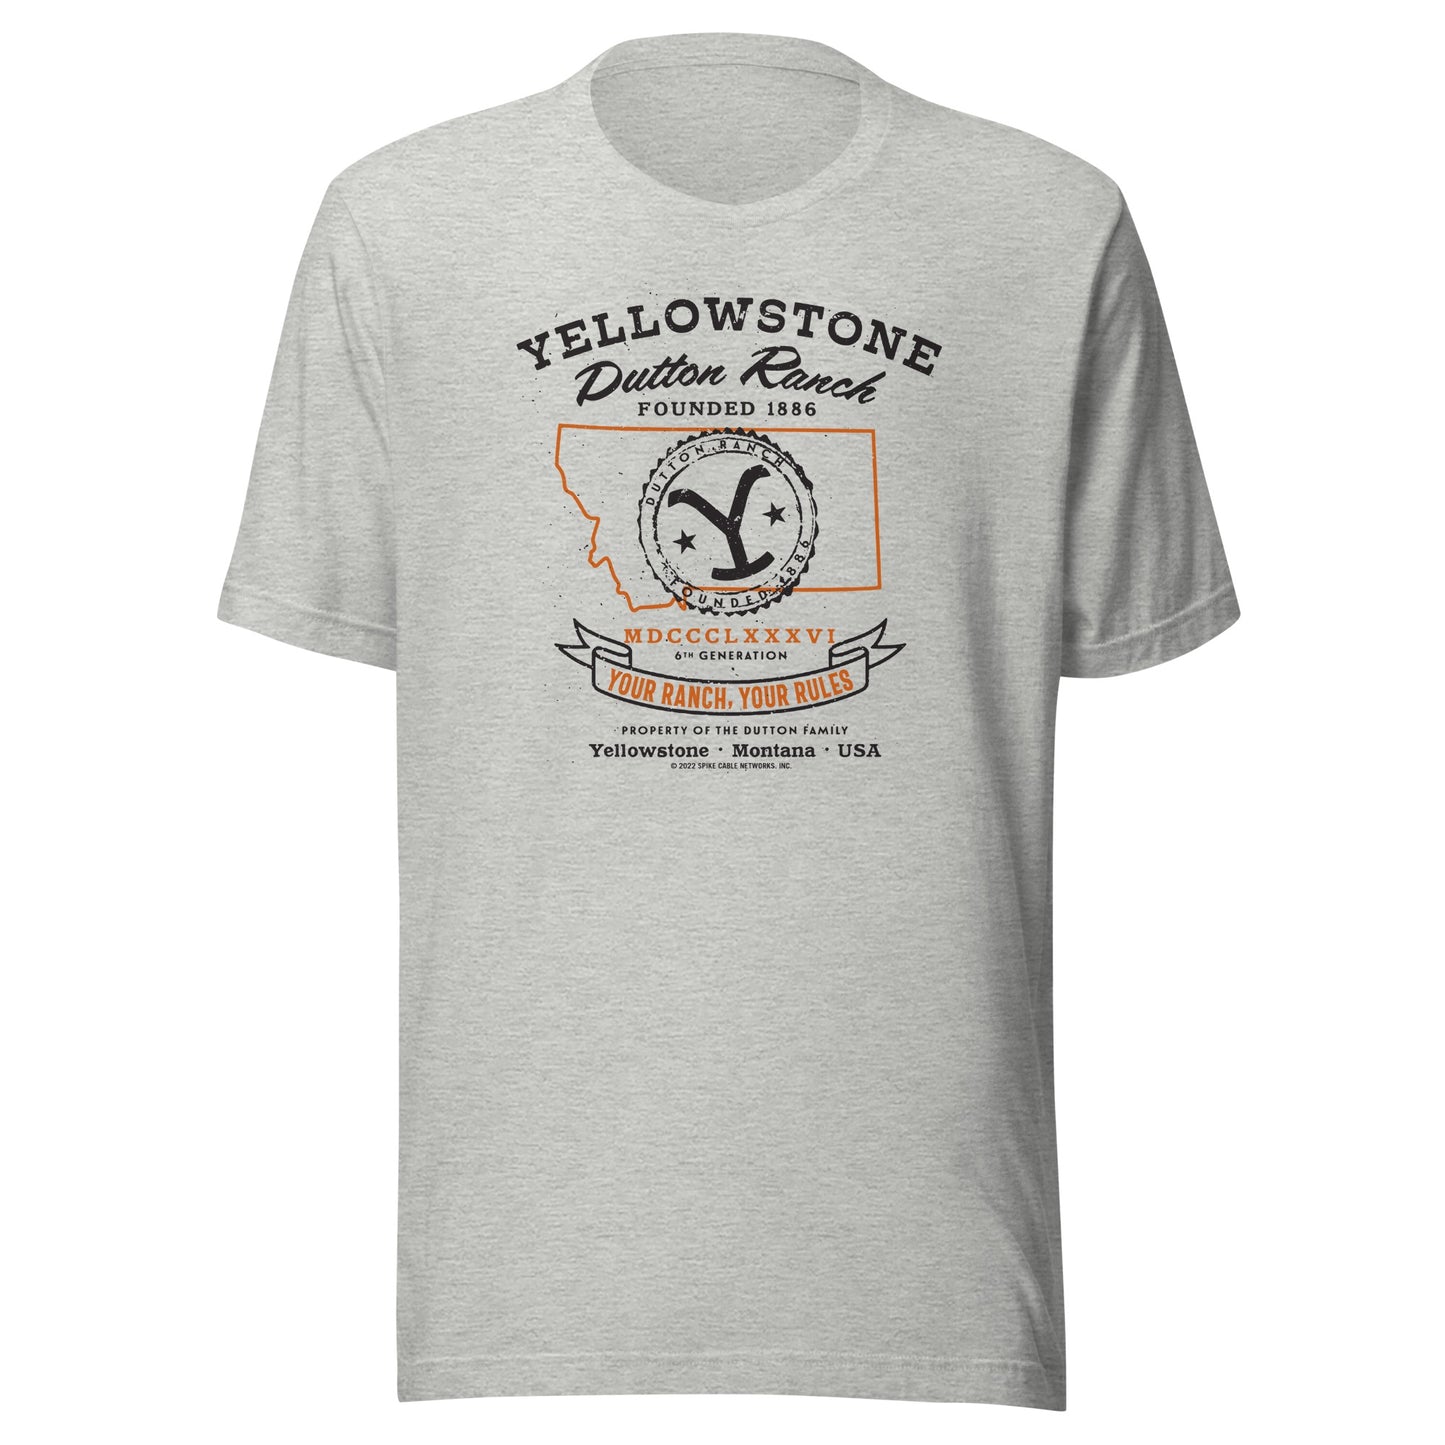 Yellowstone Dutton Ranch Your Ranch Your Rules Short Sleeve T-Shirt